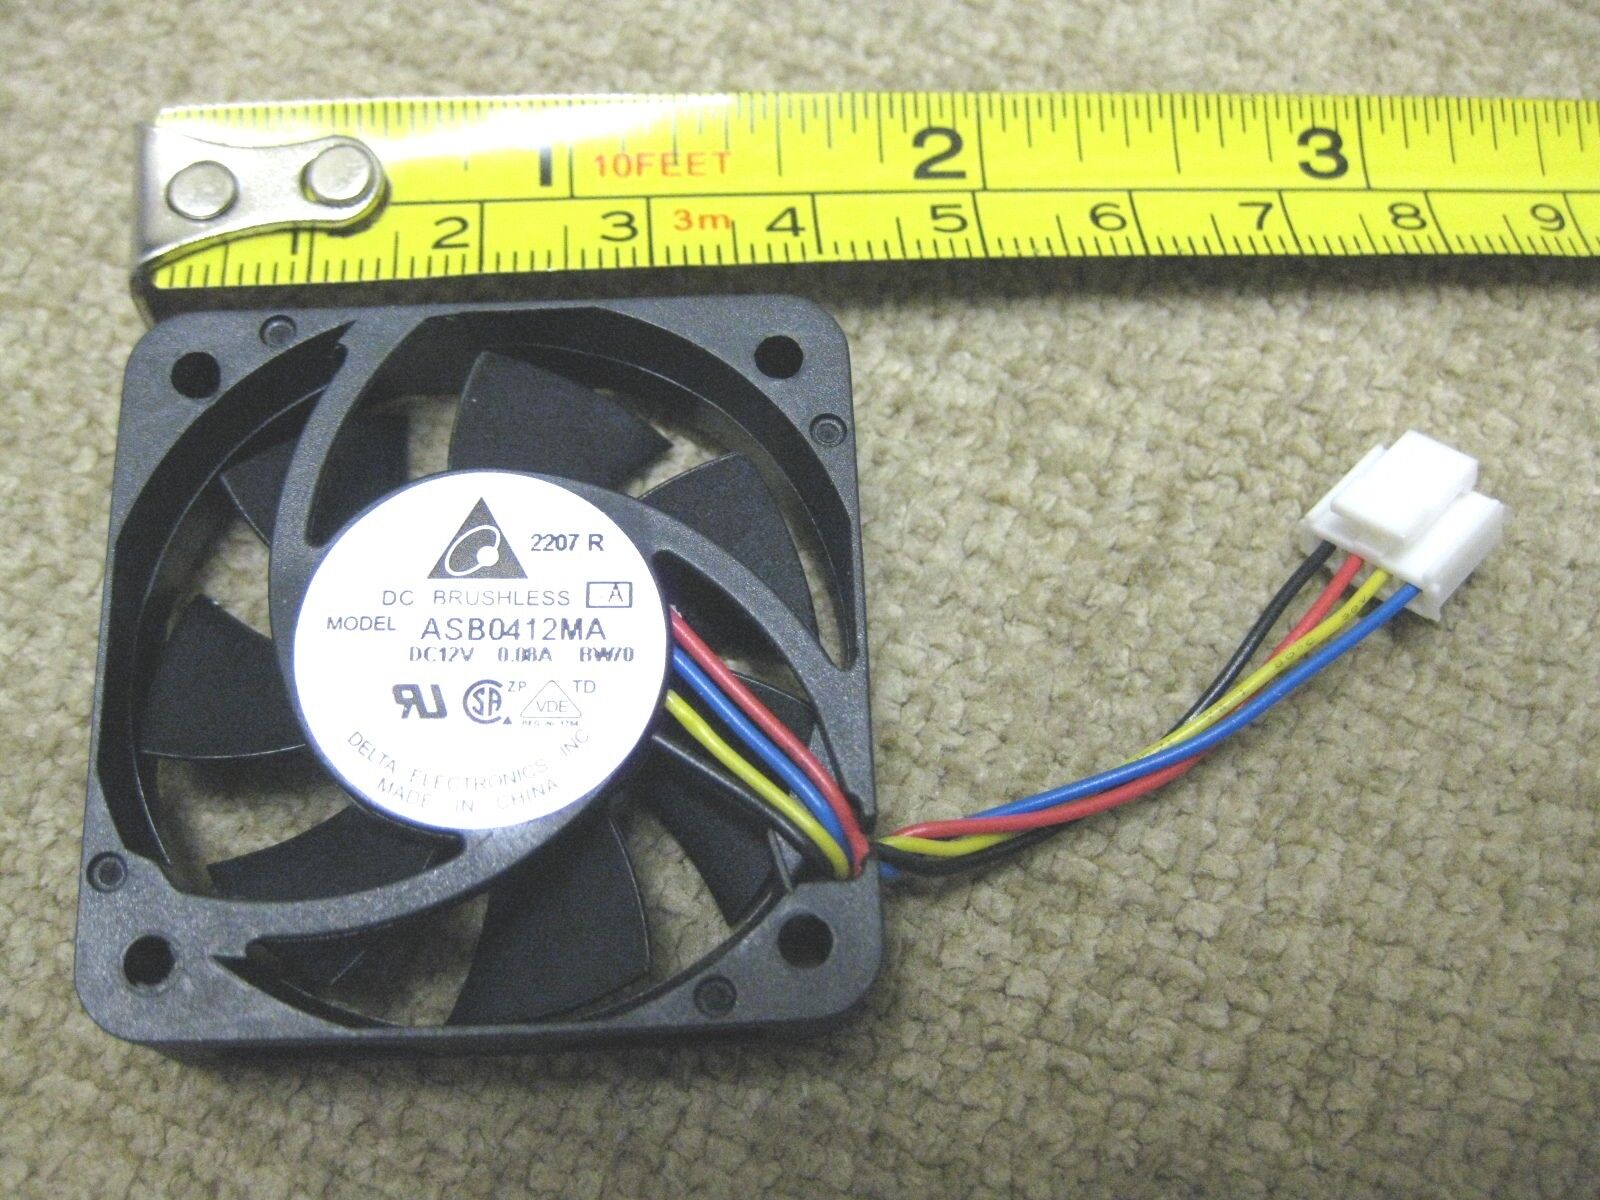 DELTA DC BRUSHLESS COOLING FAN ASB0412MA DC 12V 0.08A 4 Wires - US Ship